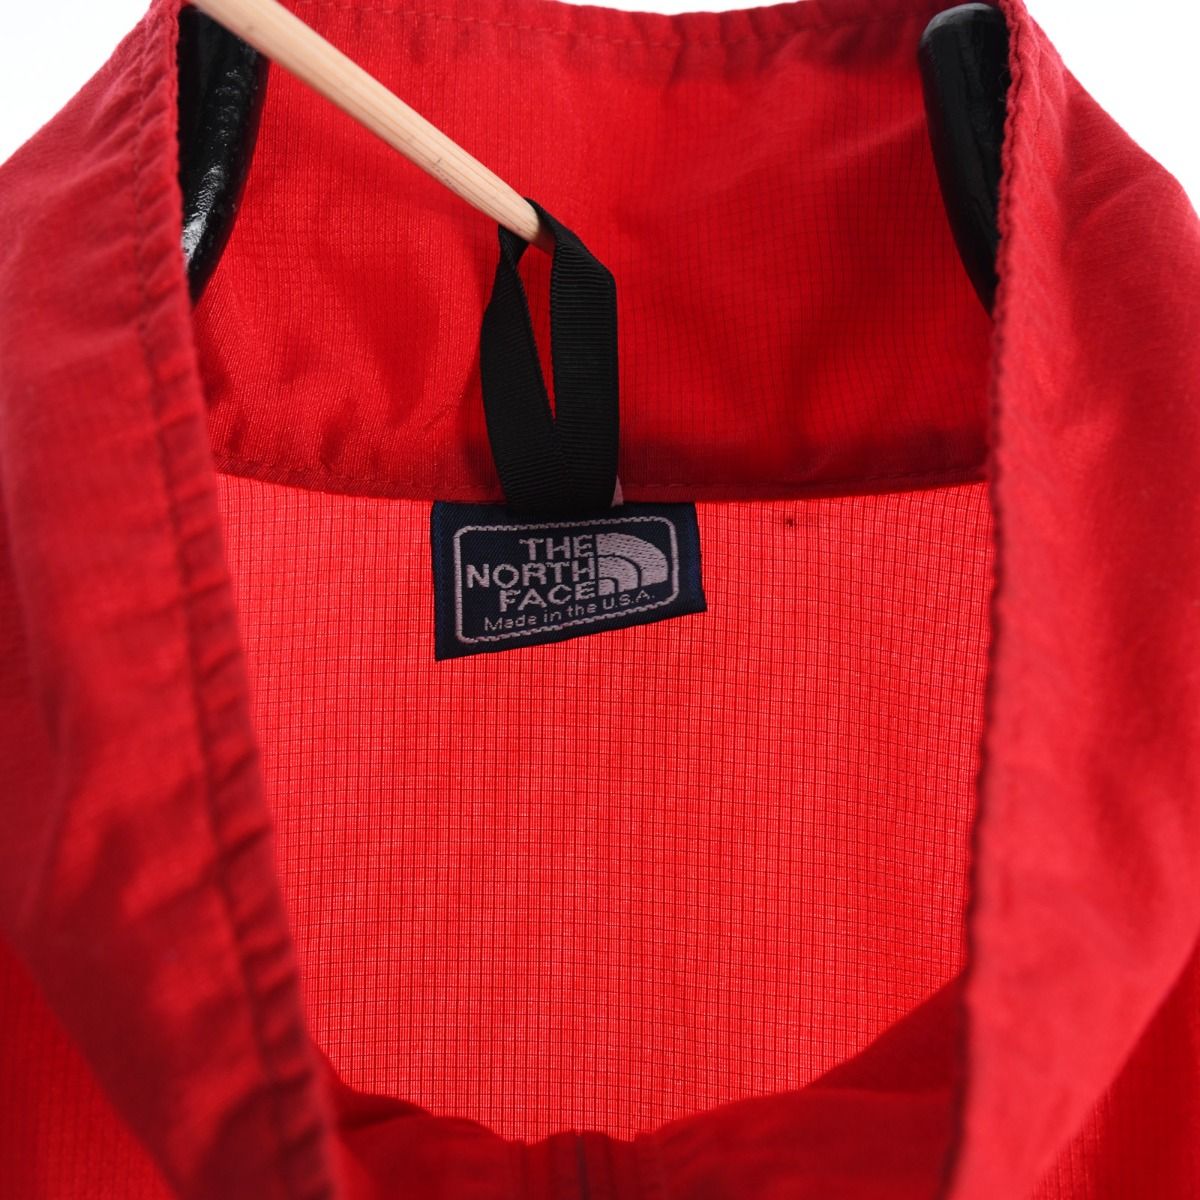 The North Face 1980s Half-Zip Pullover Jacket